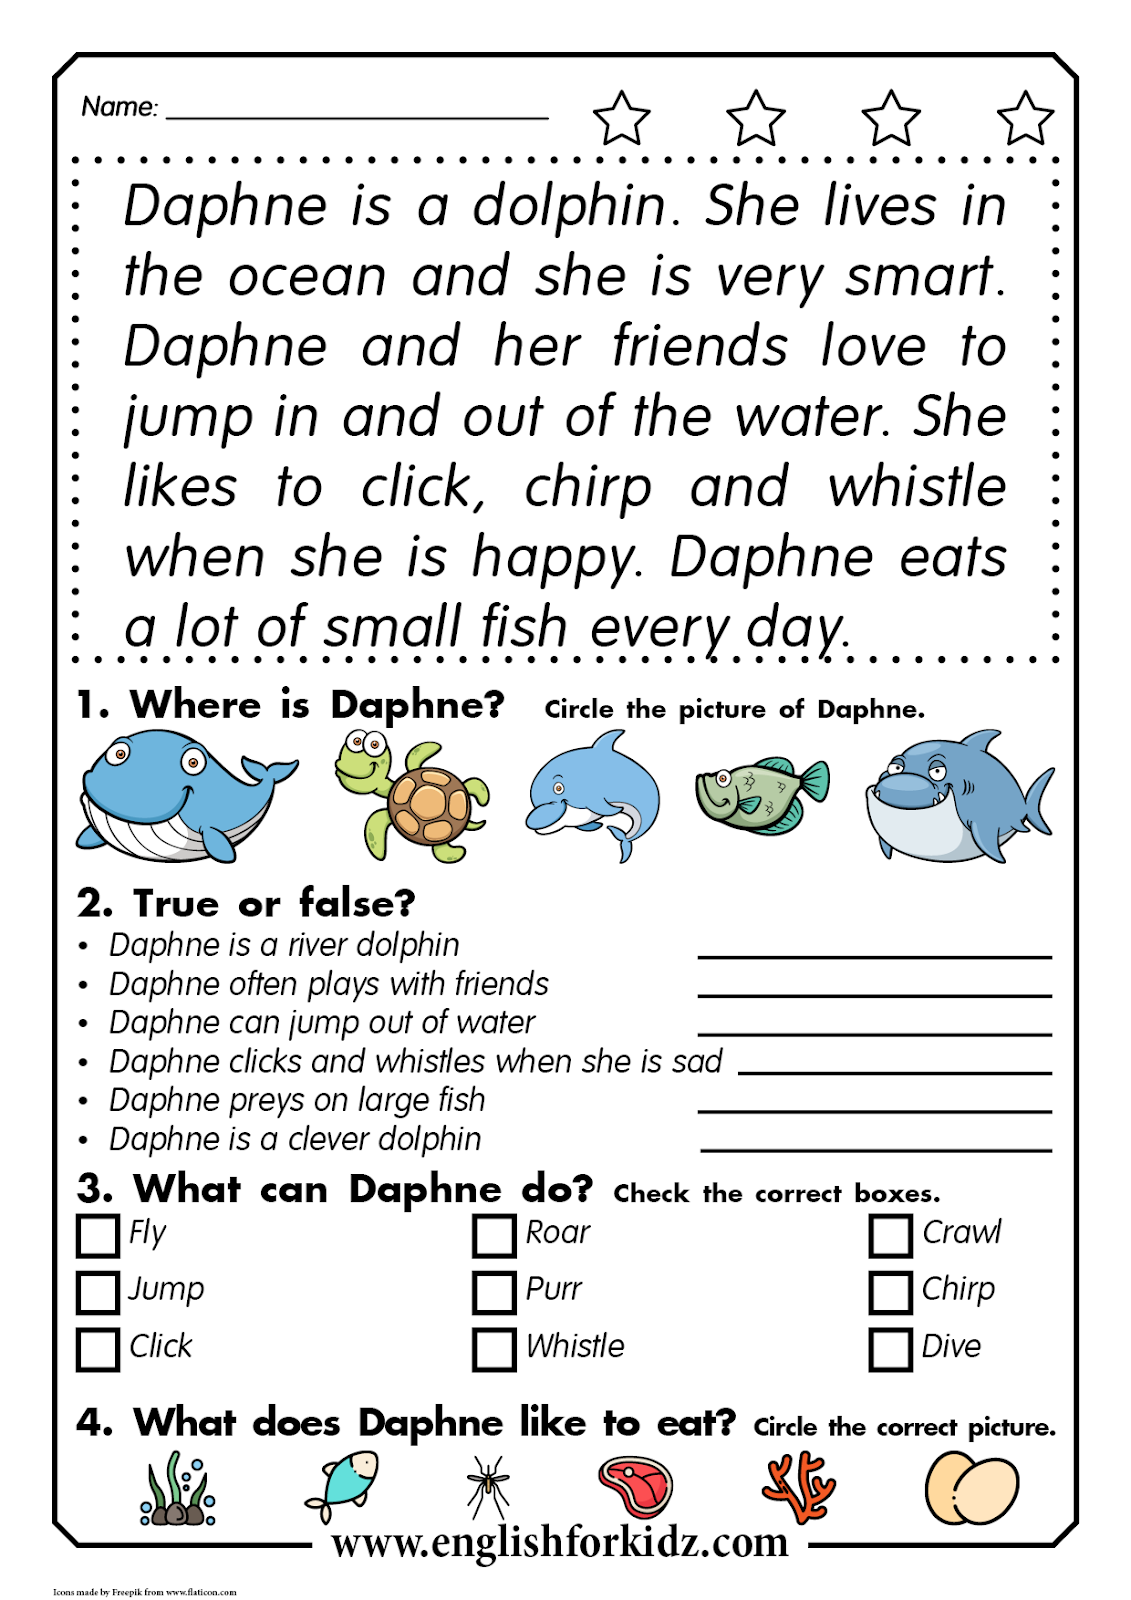 English For Kids Step By Step Reading Comprehension Worksheets Daphne 